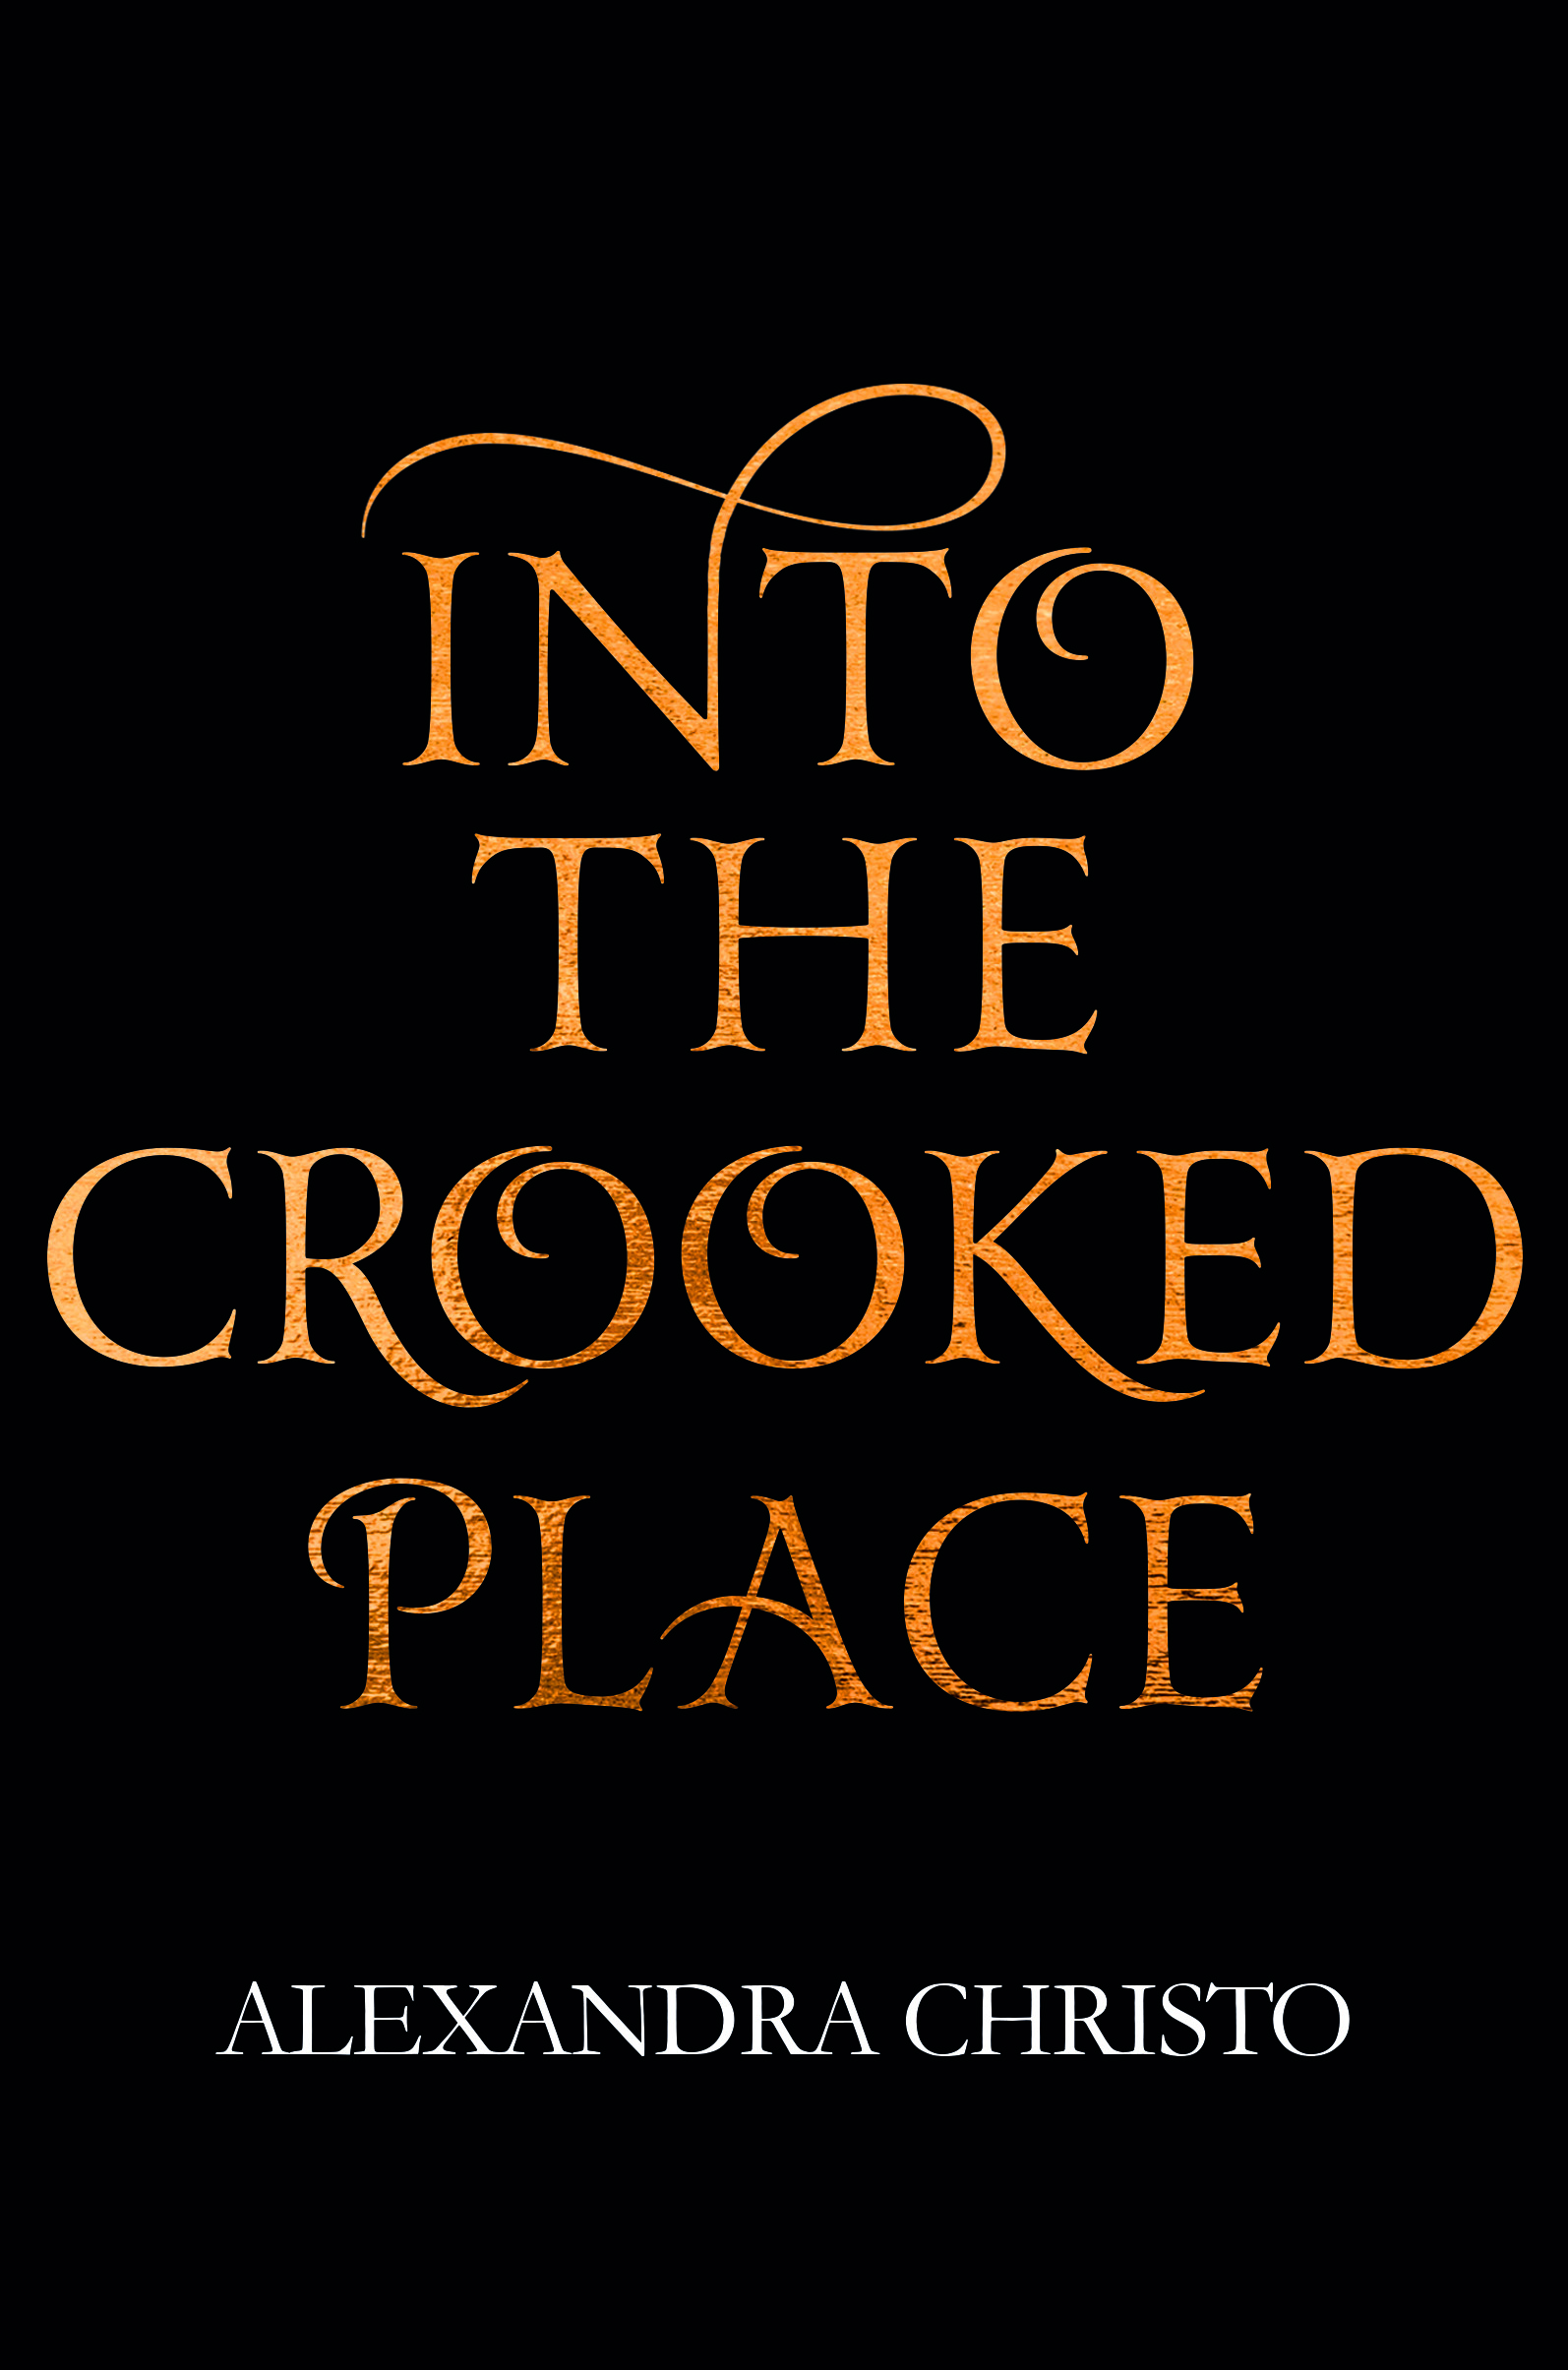 into the crooked place